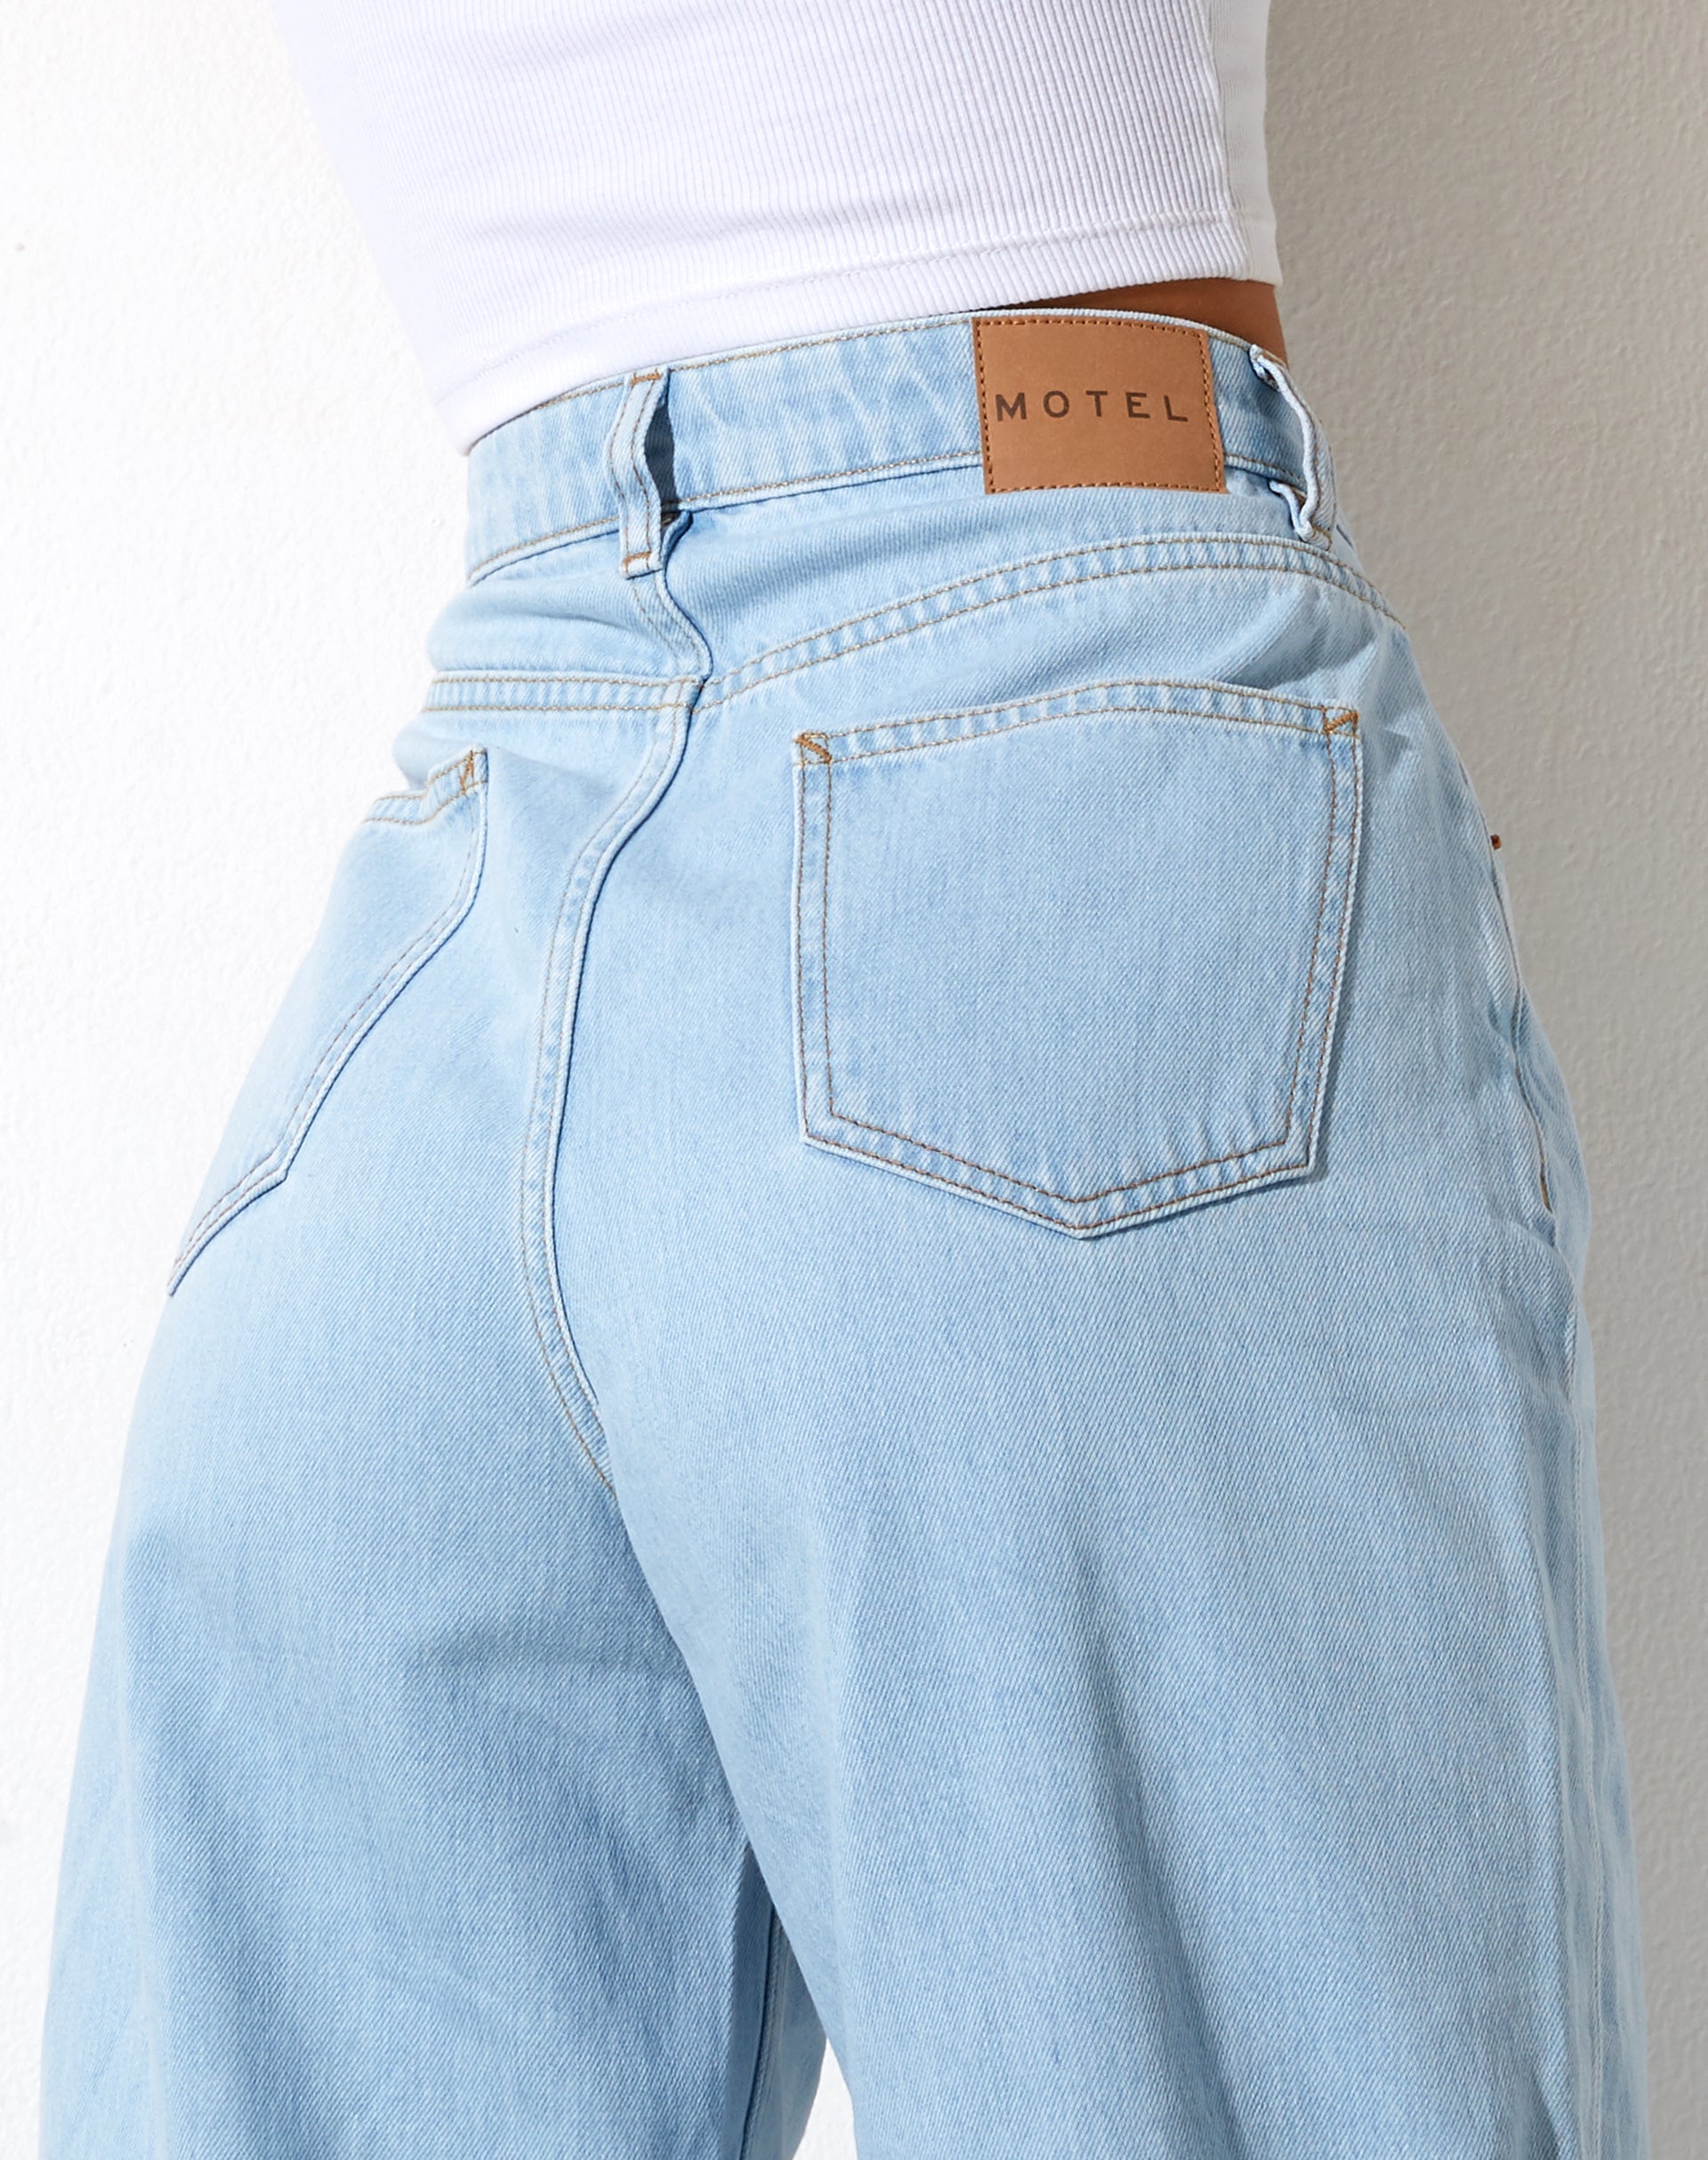 Image of Parallel Jeans in Super Light Wash